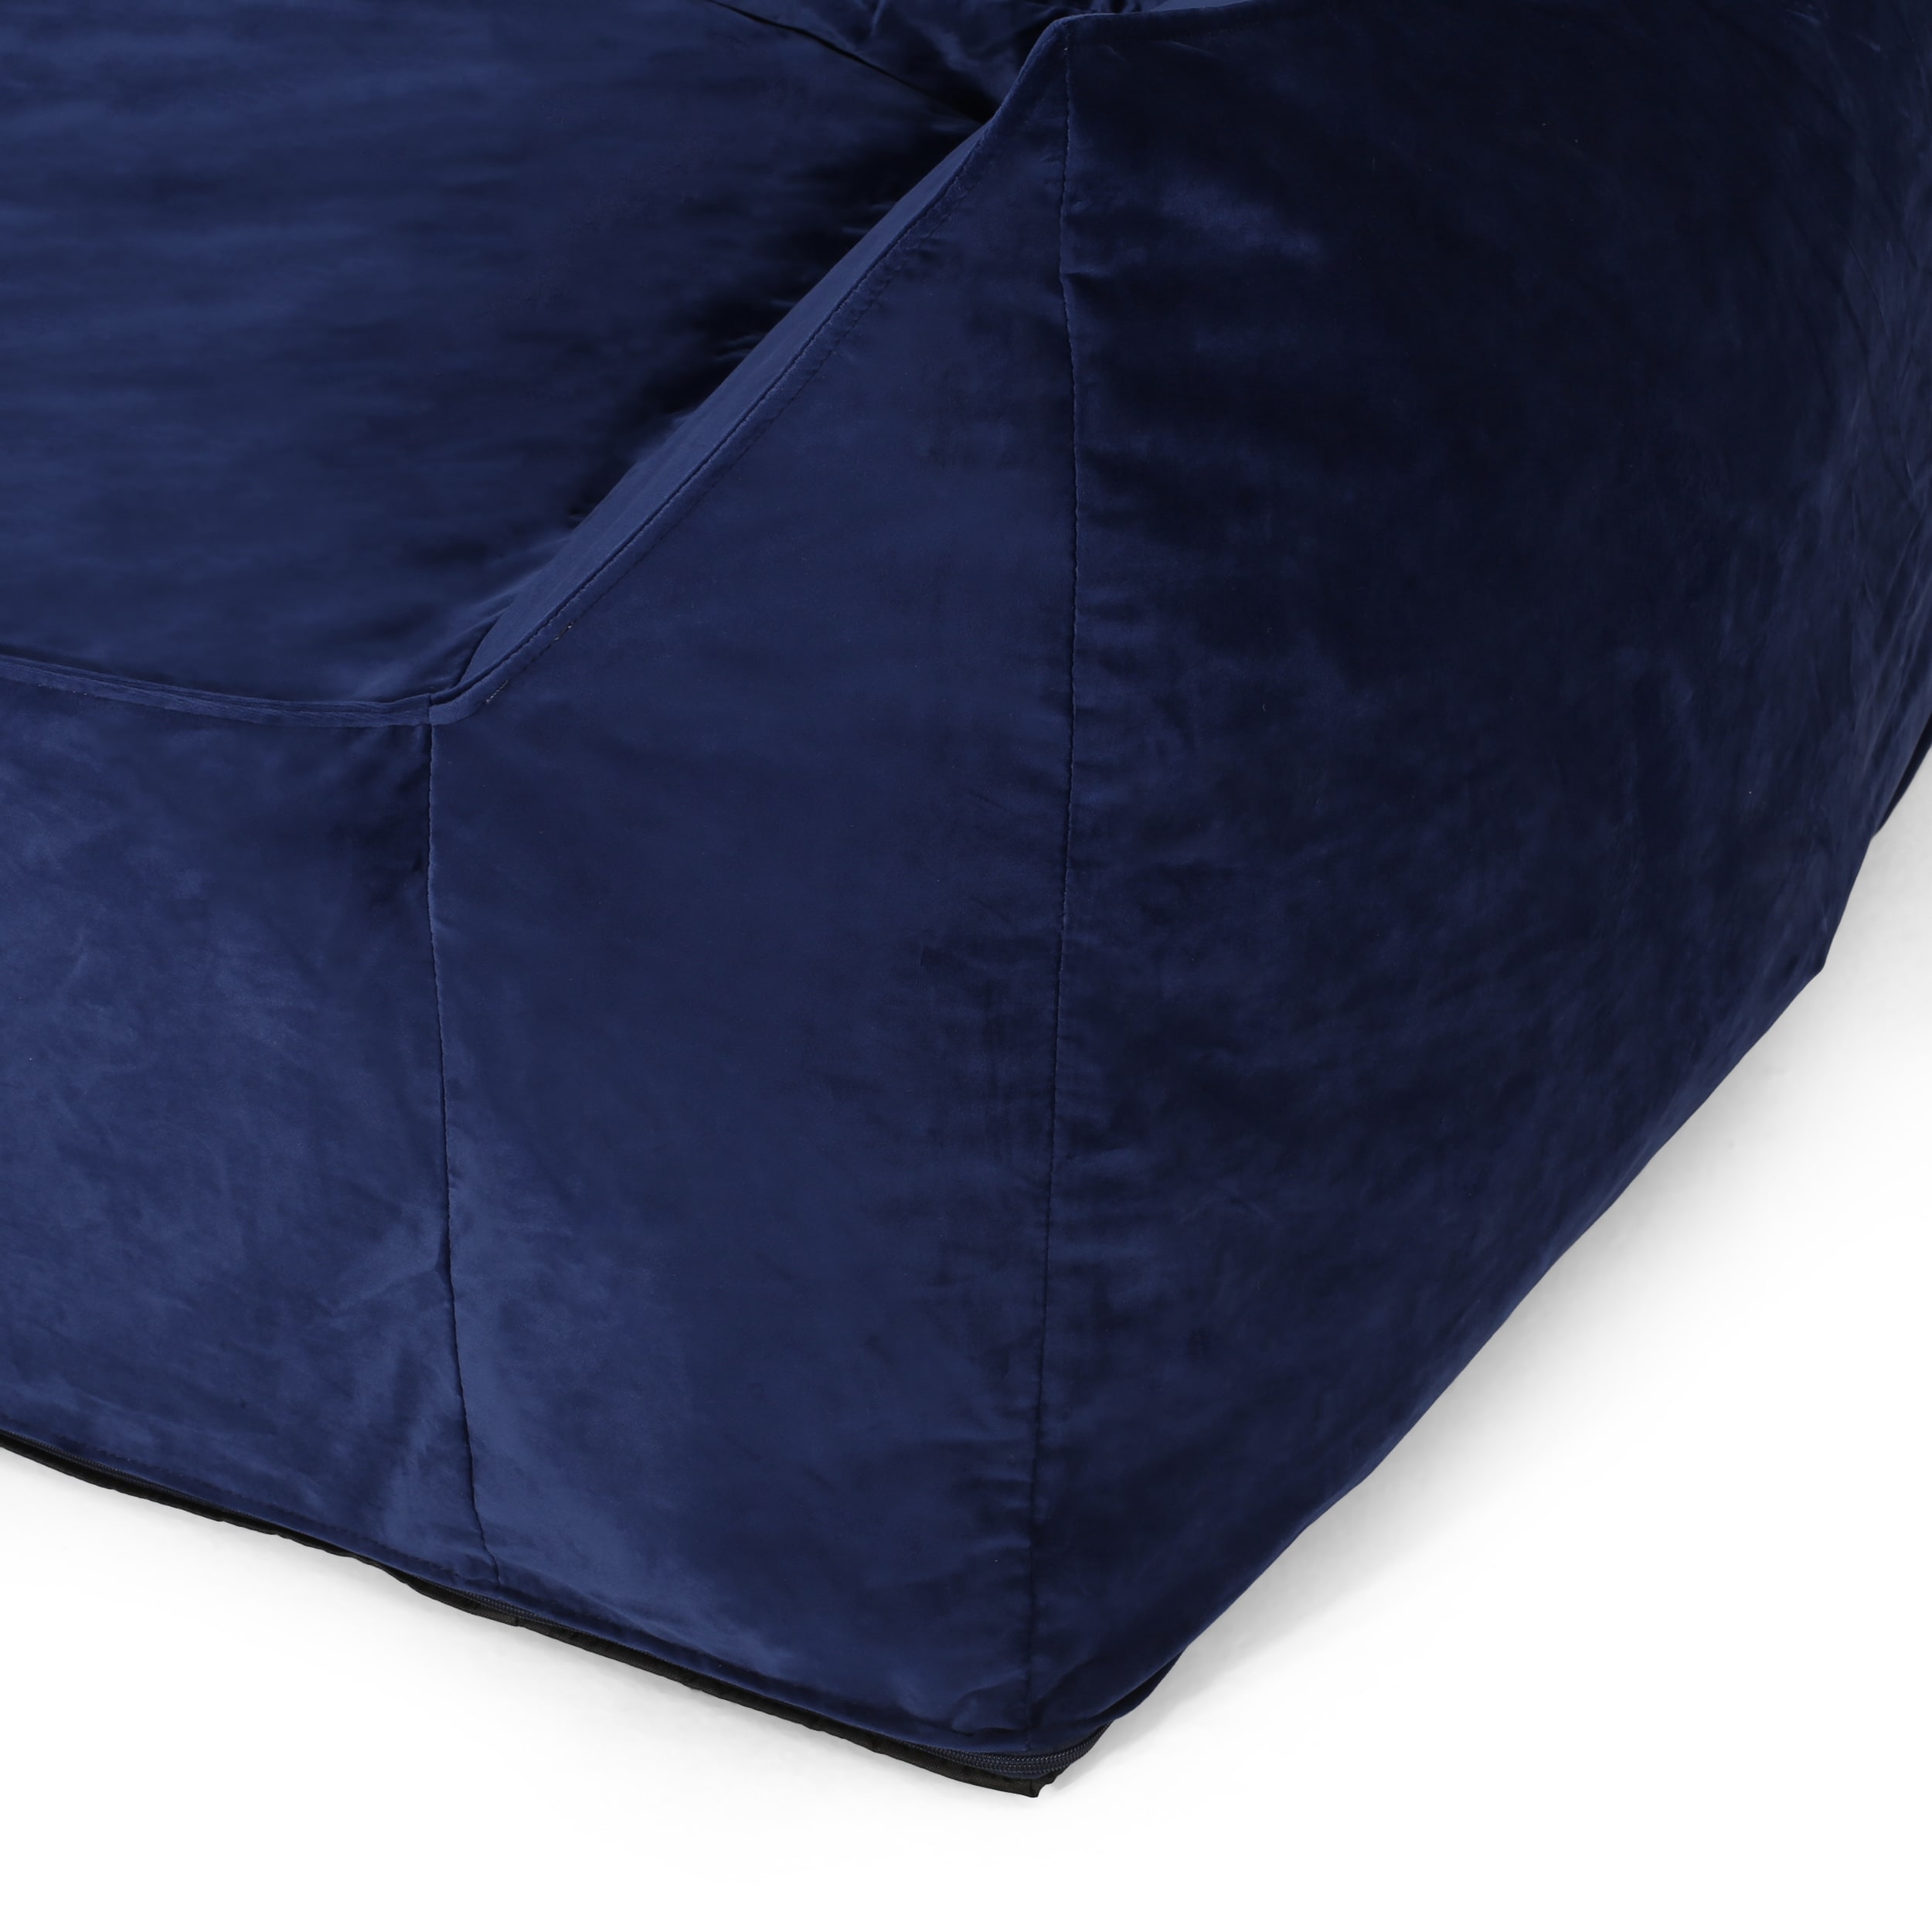 https://ak1.ostkcdn.com/images/products/is/images/direct/d246437a75e5cf9af93fcf43869033ef28d968d6/Velie-Velveteen-2-Seater-Oversized-Bean-Bag-Chair-with-Armrests-by-Christopher-Knight-Home.jpg